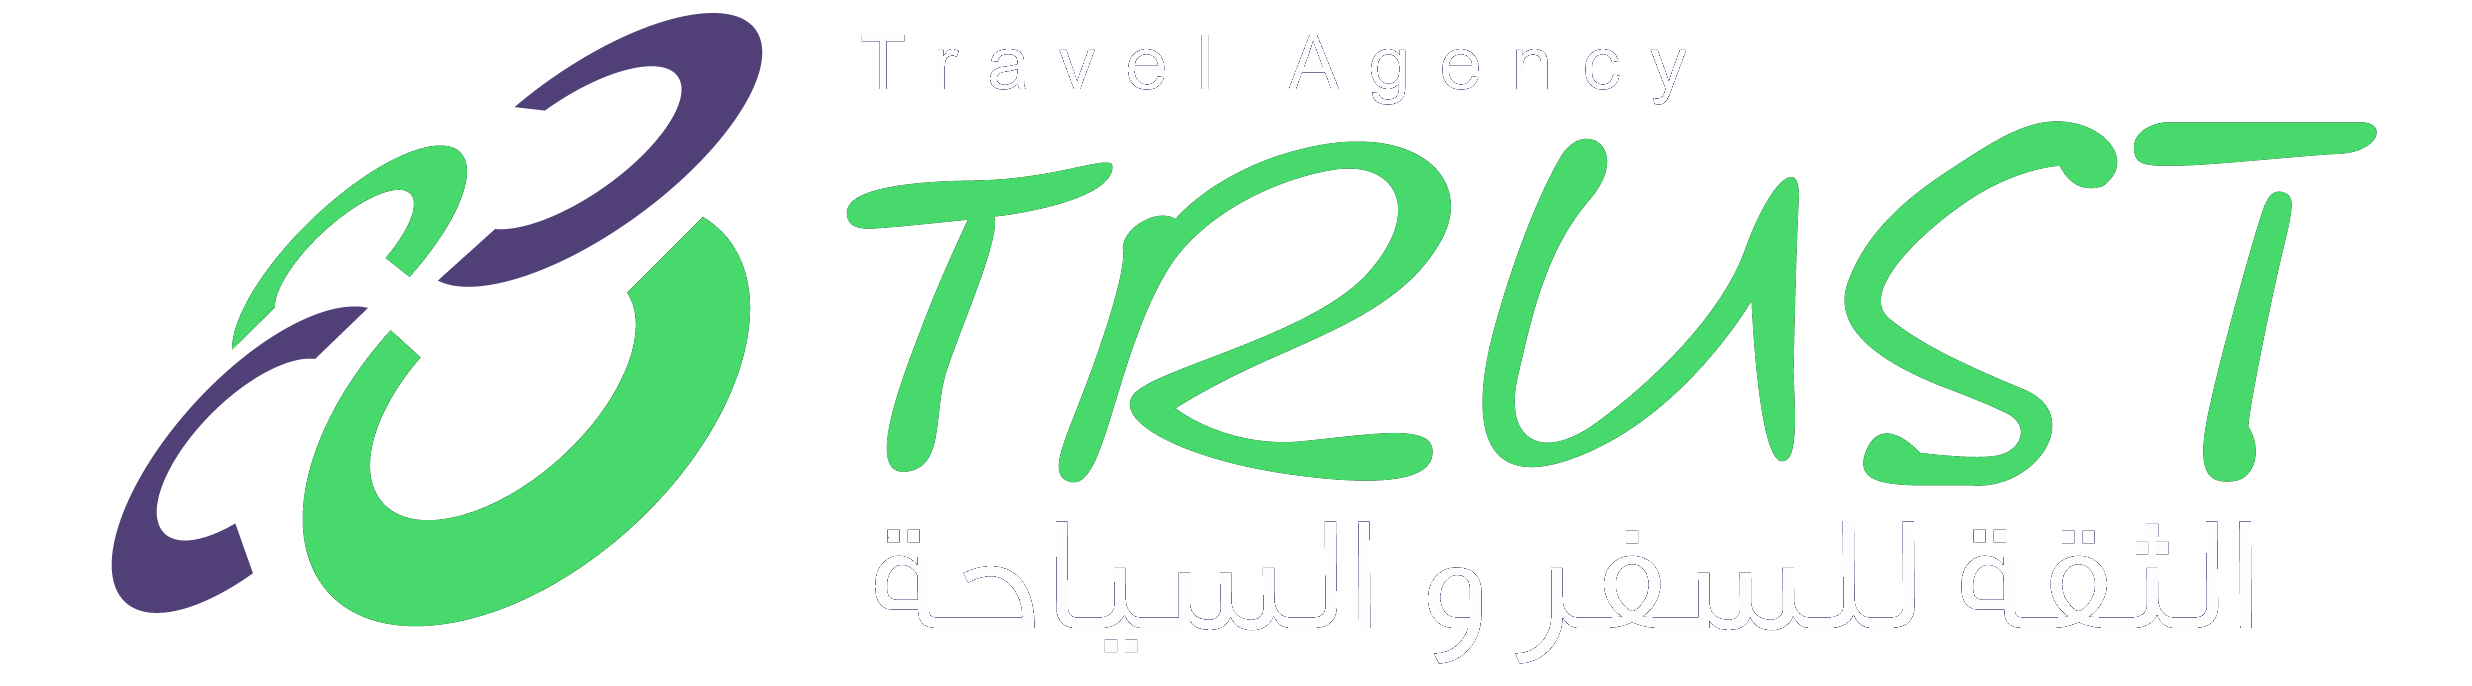 About Trust Travel and Tourism Agency